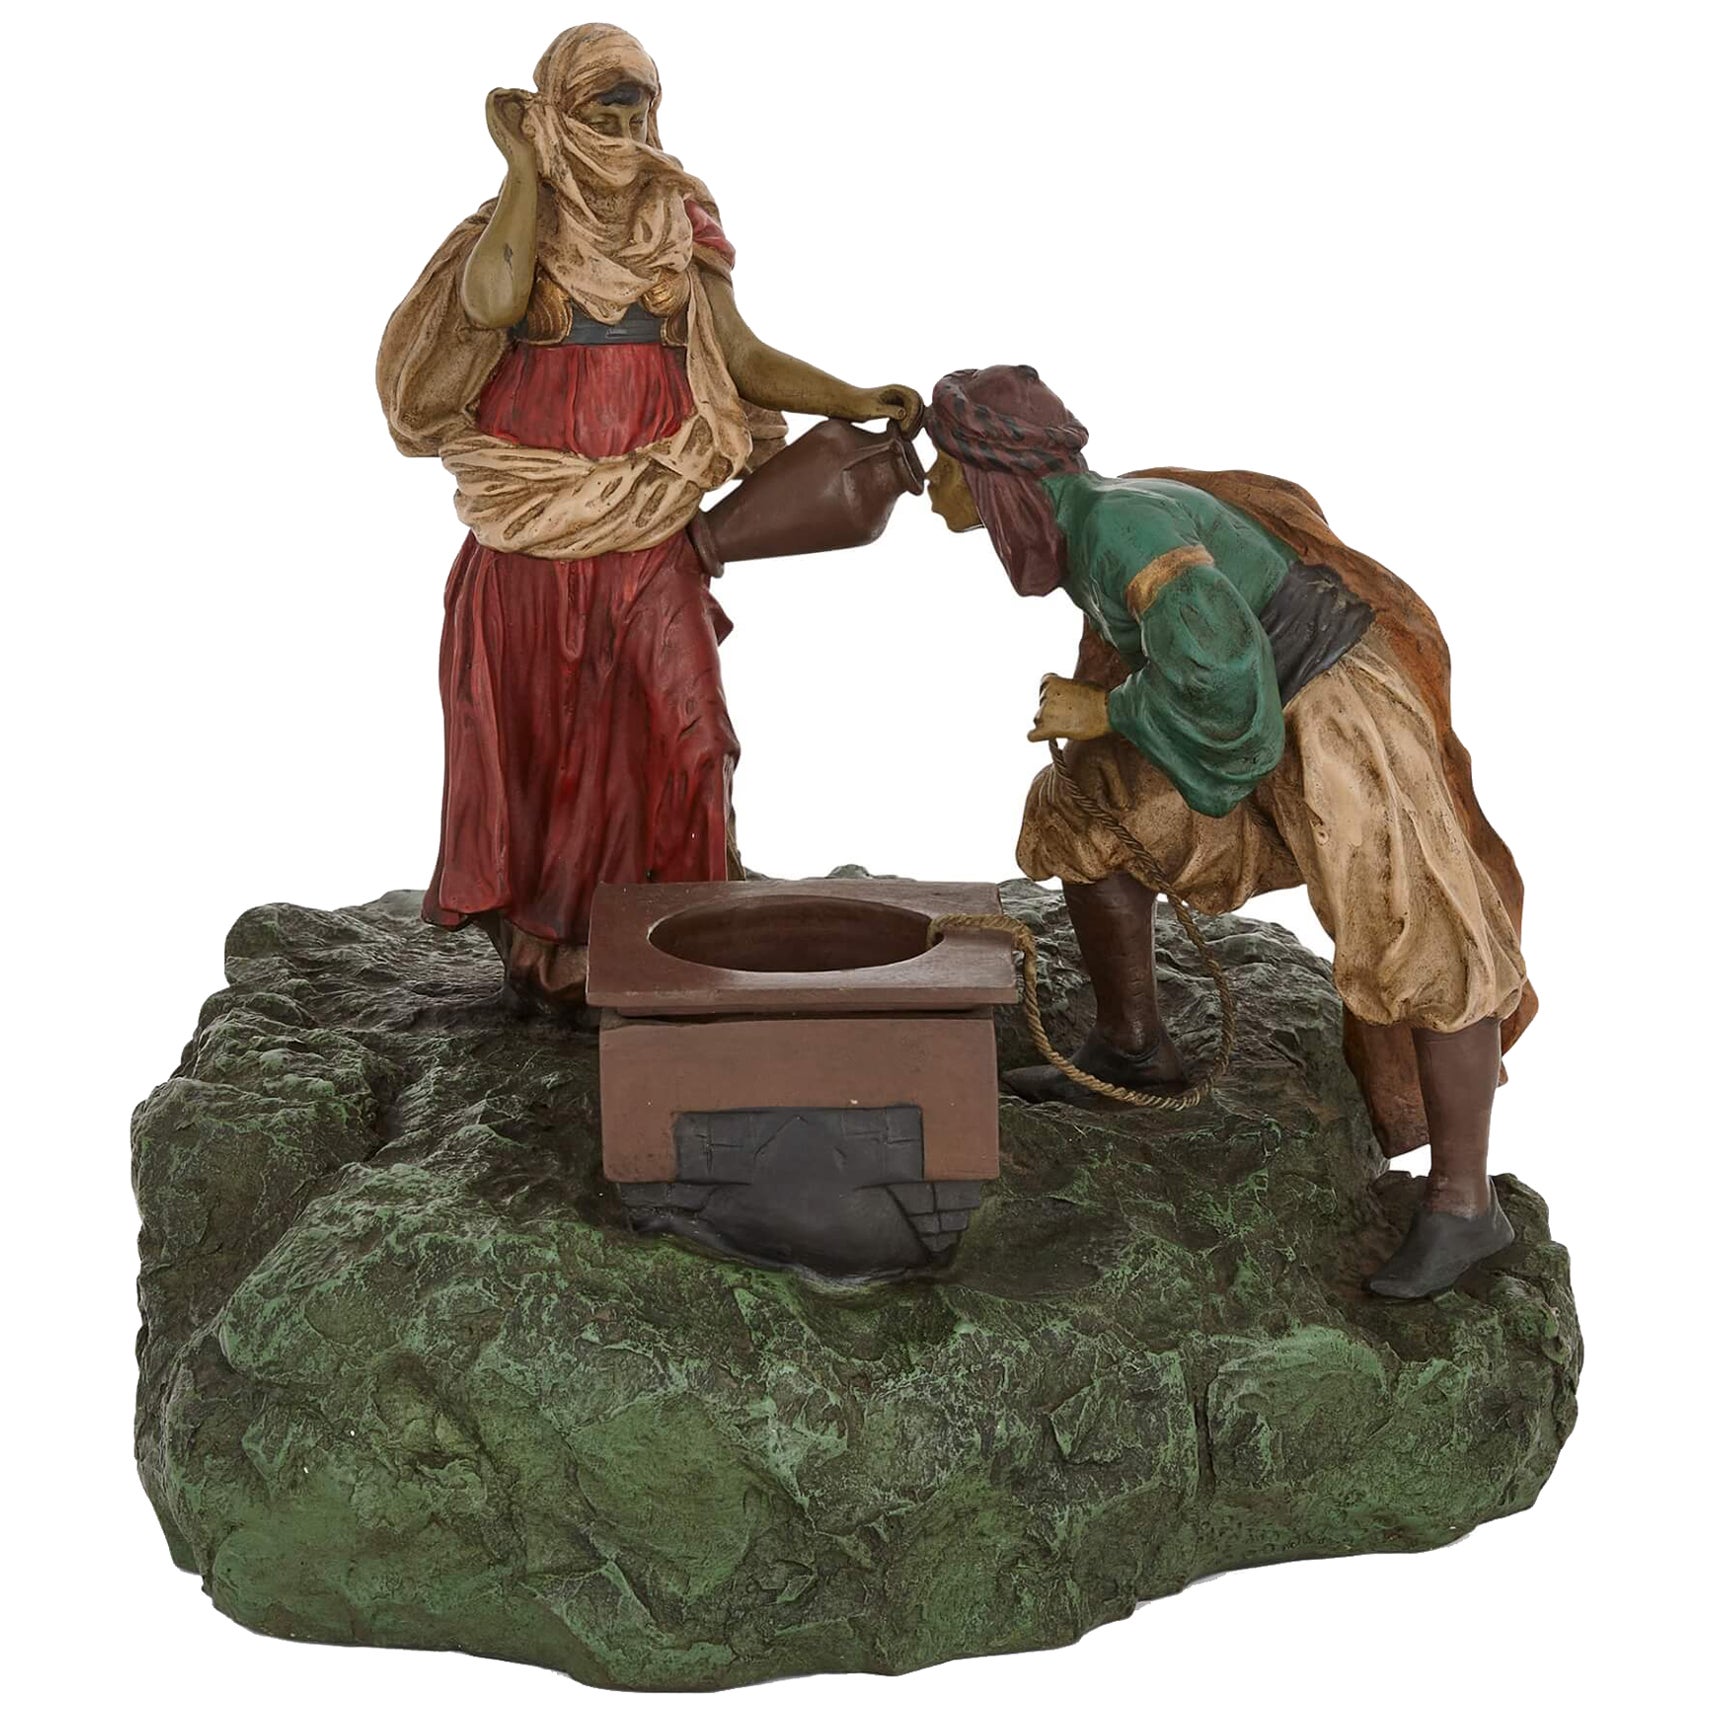 Viennese Cold-Painted Bronze by Bergman Depicting Rebecca at the Well